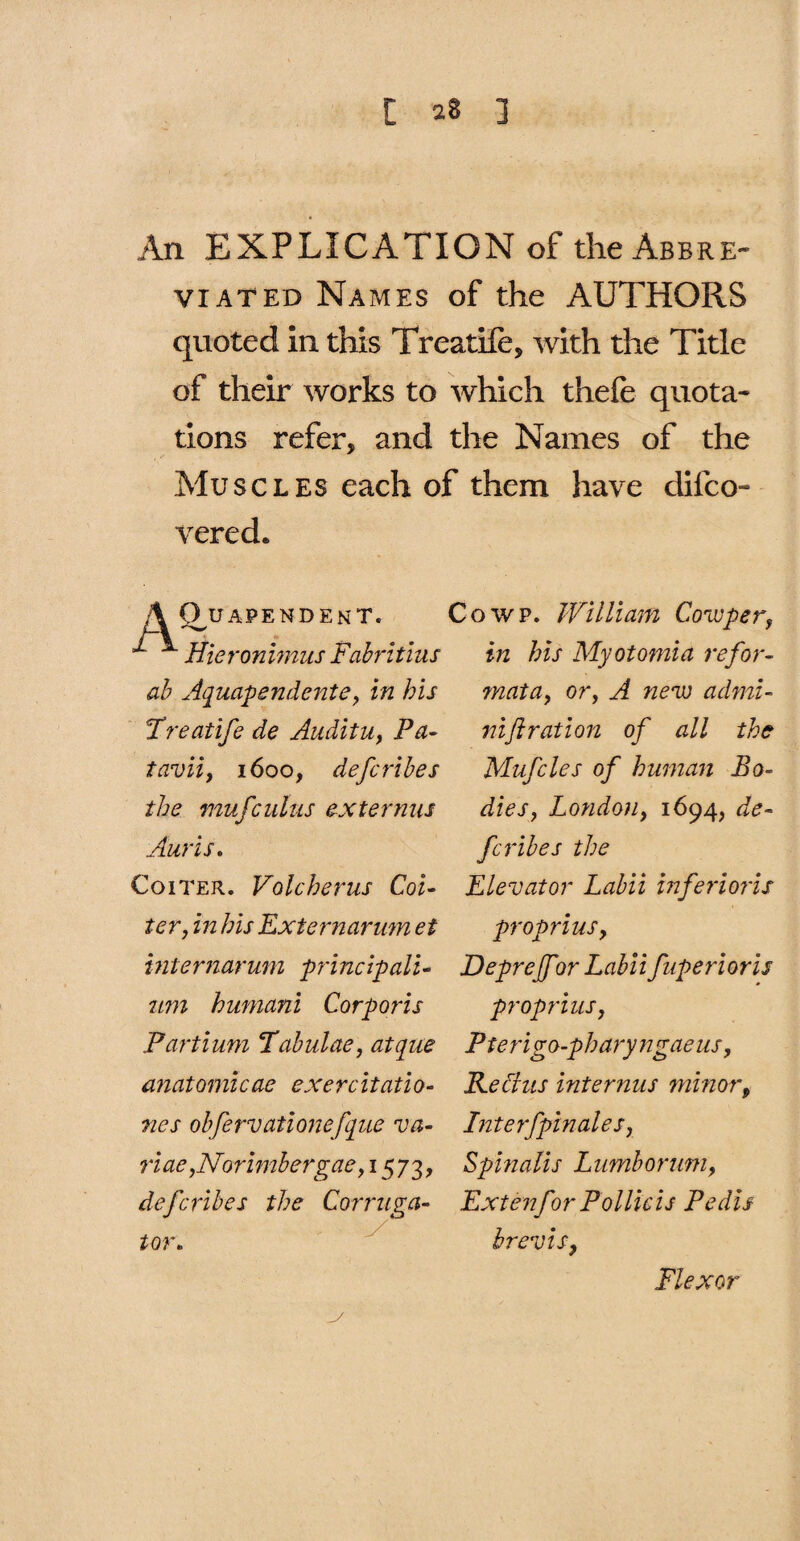 An EXPLICATION of the Abbre¬ viated Names of the AUTHORS quoted in this Treatife, with the Title of their works to which thefe quota¬ tions refer, and the Names of the Muscles each of them have dilco- vercxh Ouapendent. Hieronimus Fabritius ab Aquapendente, in his Treatife de Audit u, Pa- tavii, 1600, defcribes the mujcuius ex ter mis Auris. Co 1 ter. Volcherus Col¬ ter , in his Externarum et internarum principali- urn humani Corporis Partium Tabulae, atque anatomicae exercitatio- lies obfervationefque va- riae ,Norimbergae, 1573, defcribes the Cor ruga- tor. Cowp. William Co-coper, in his Myotomia re for- ?nata, or, A new admi- niftration of all the Mufcles of human Bo¬ dies, London, 1694, de¬ fcribes the Elevator Labii inferioris propriuSy Depreff or Labii fuperioris propriuSy Pie rigo-phary ngae us, ReAus interims minor, Interfpinales, Spinalis Lumborum, Extenf ir Pollicis Pedis brevis, Flexor